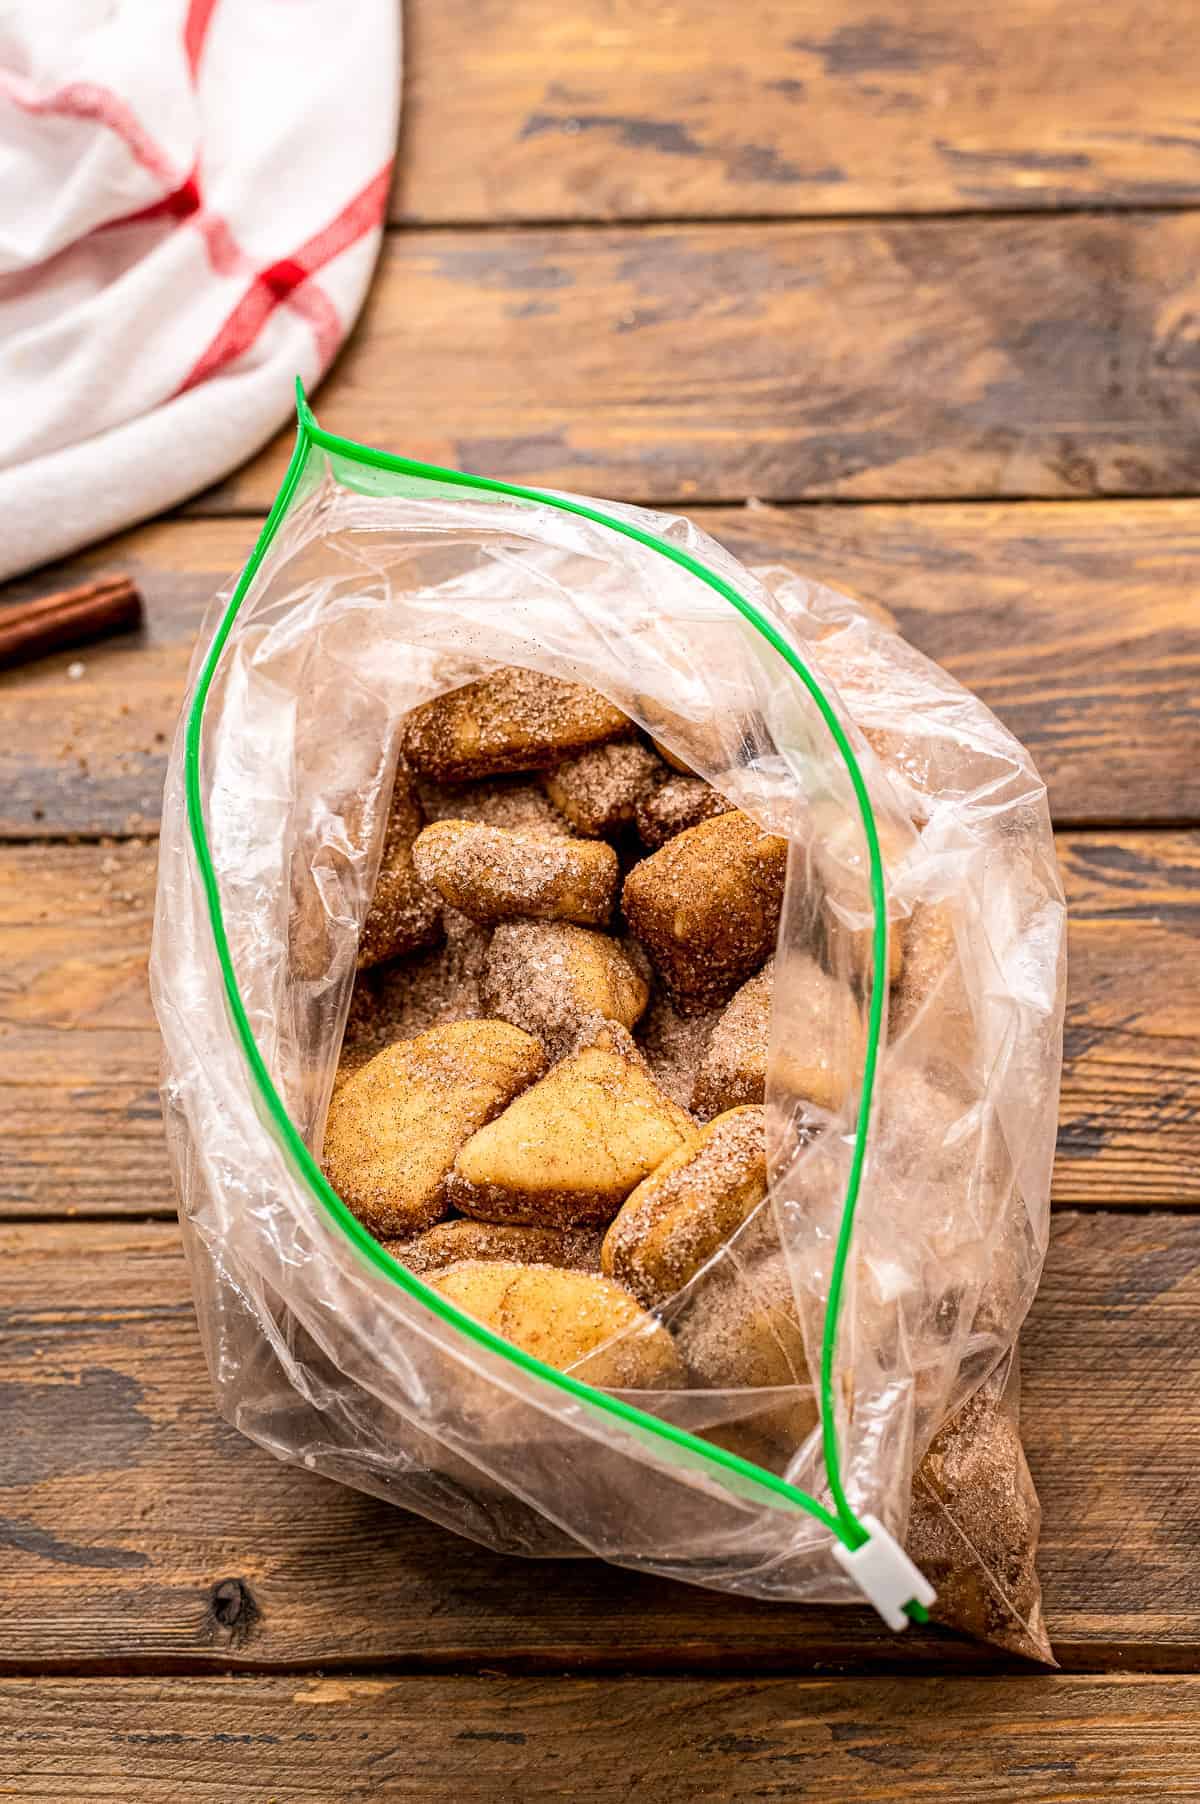 A resealable bag with cinnamon sugar covered biscuit pieces in it